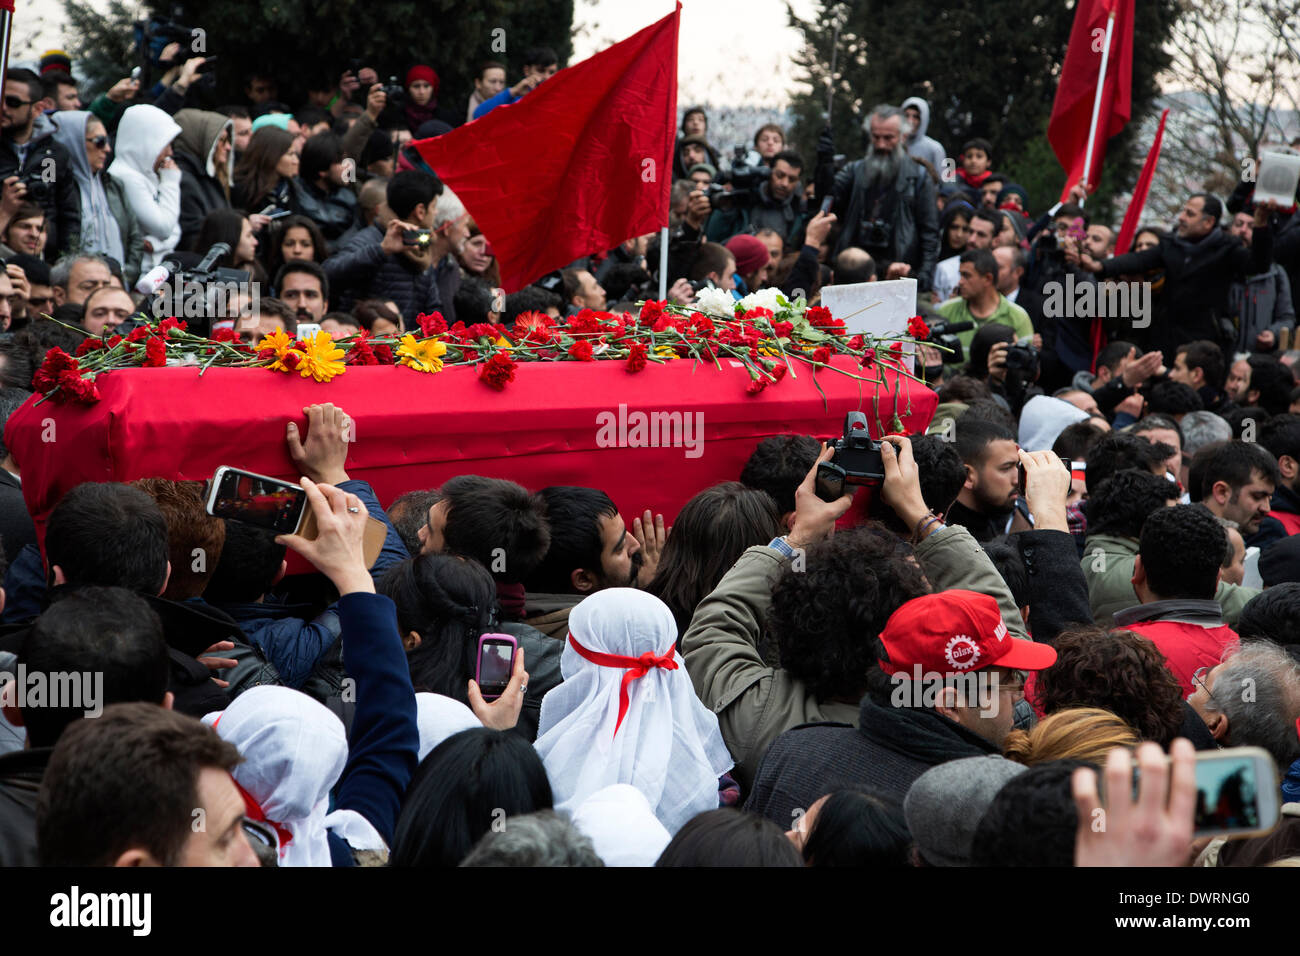 Kadikoy, Istanbul. 12 March 2014. Berkin Elvan, a 15 year old boy hit by a tear gas canister during Gezi Park protests, was celebrated with a burial ceremony where thousands of people from all walks of life attended. Photo by Bikem Ekberzade/Alamy Live News Stock Photo